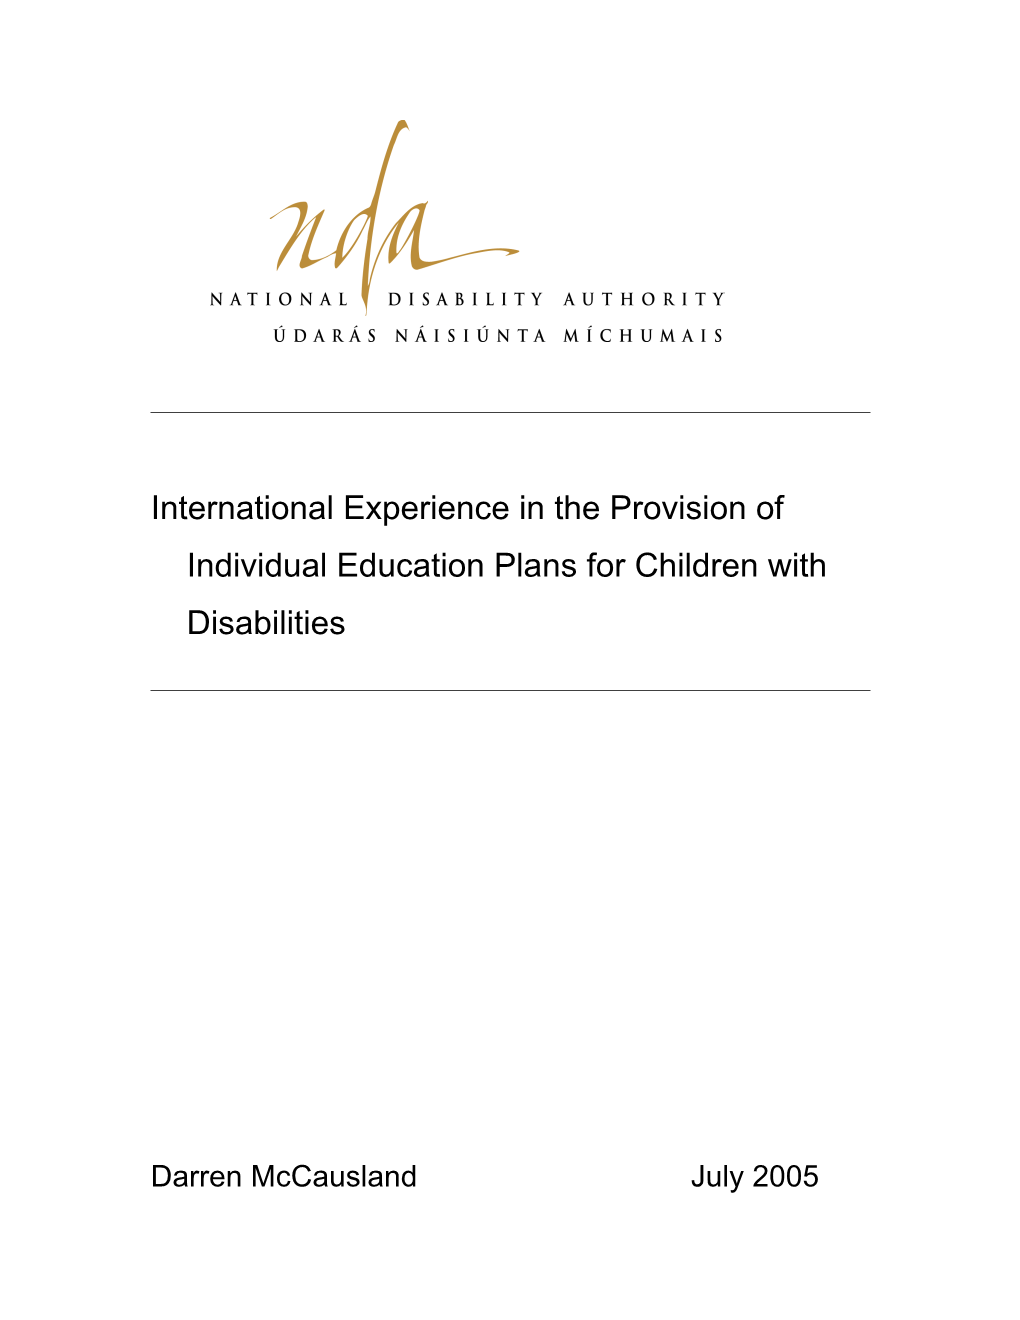 International Experience in the Provision of Individual Education Plans for Children With